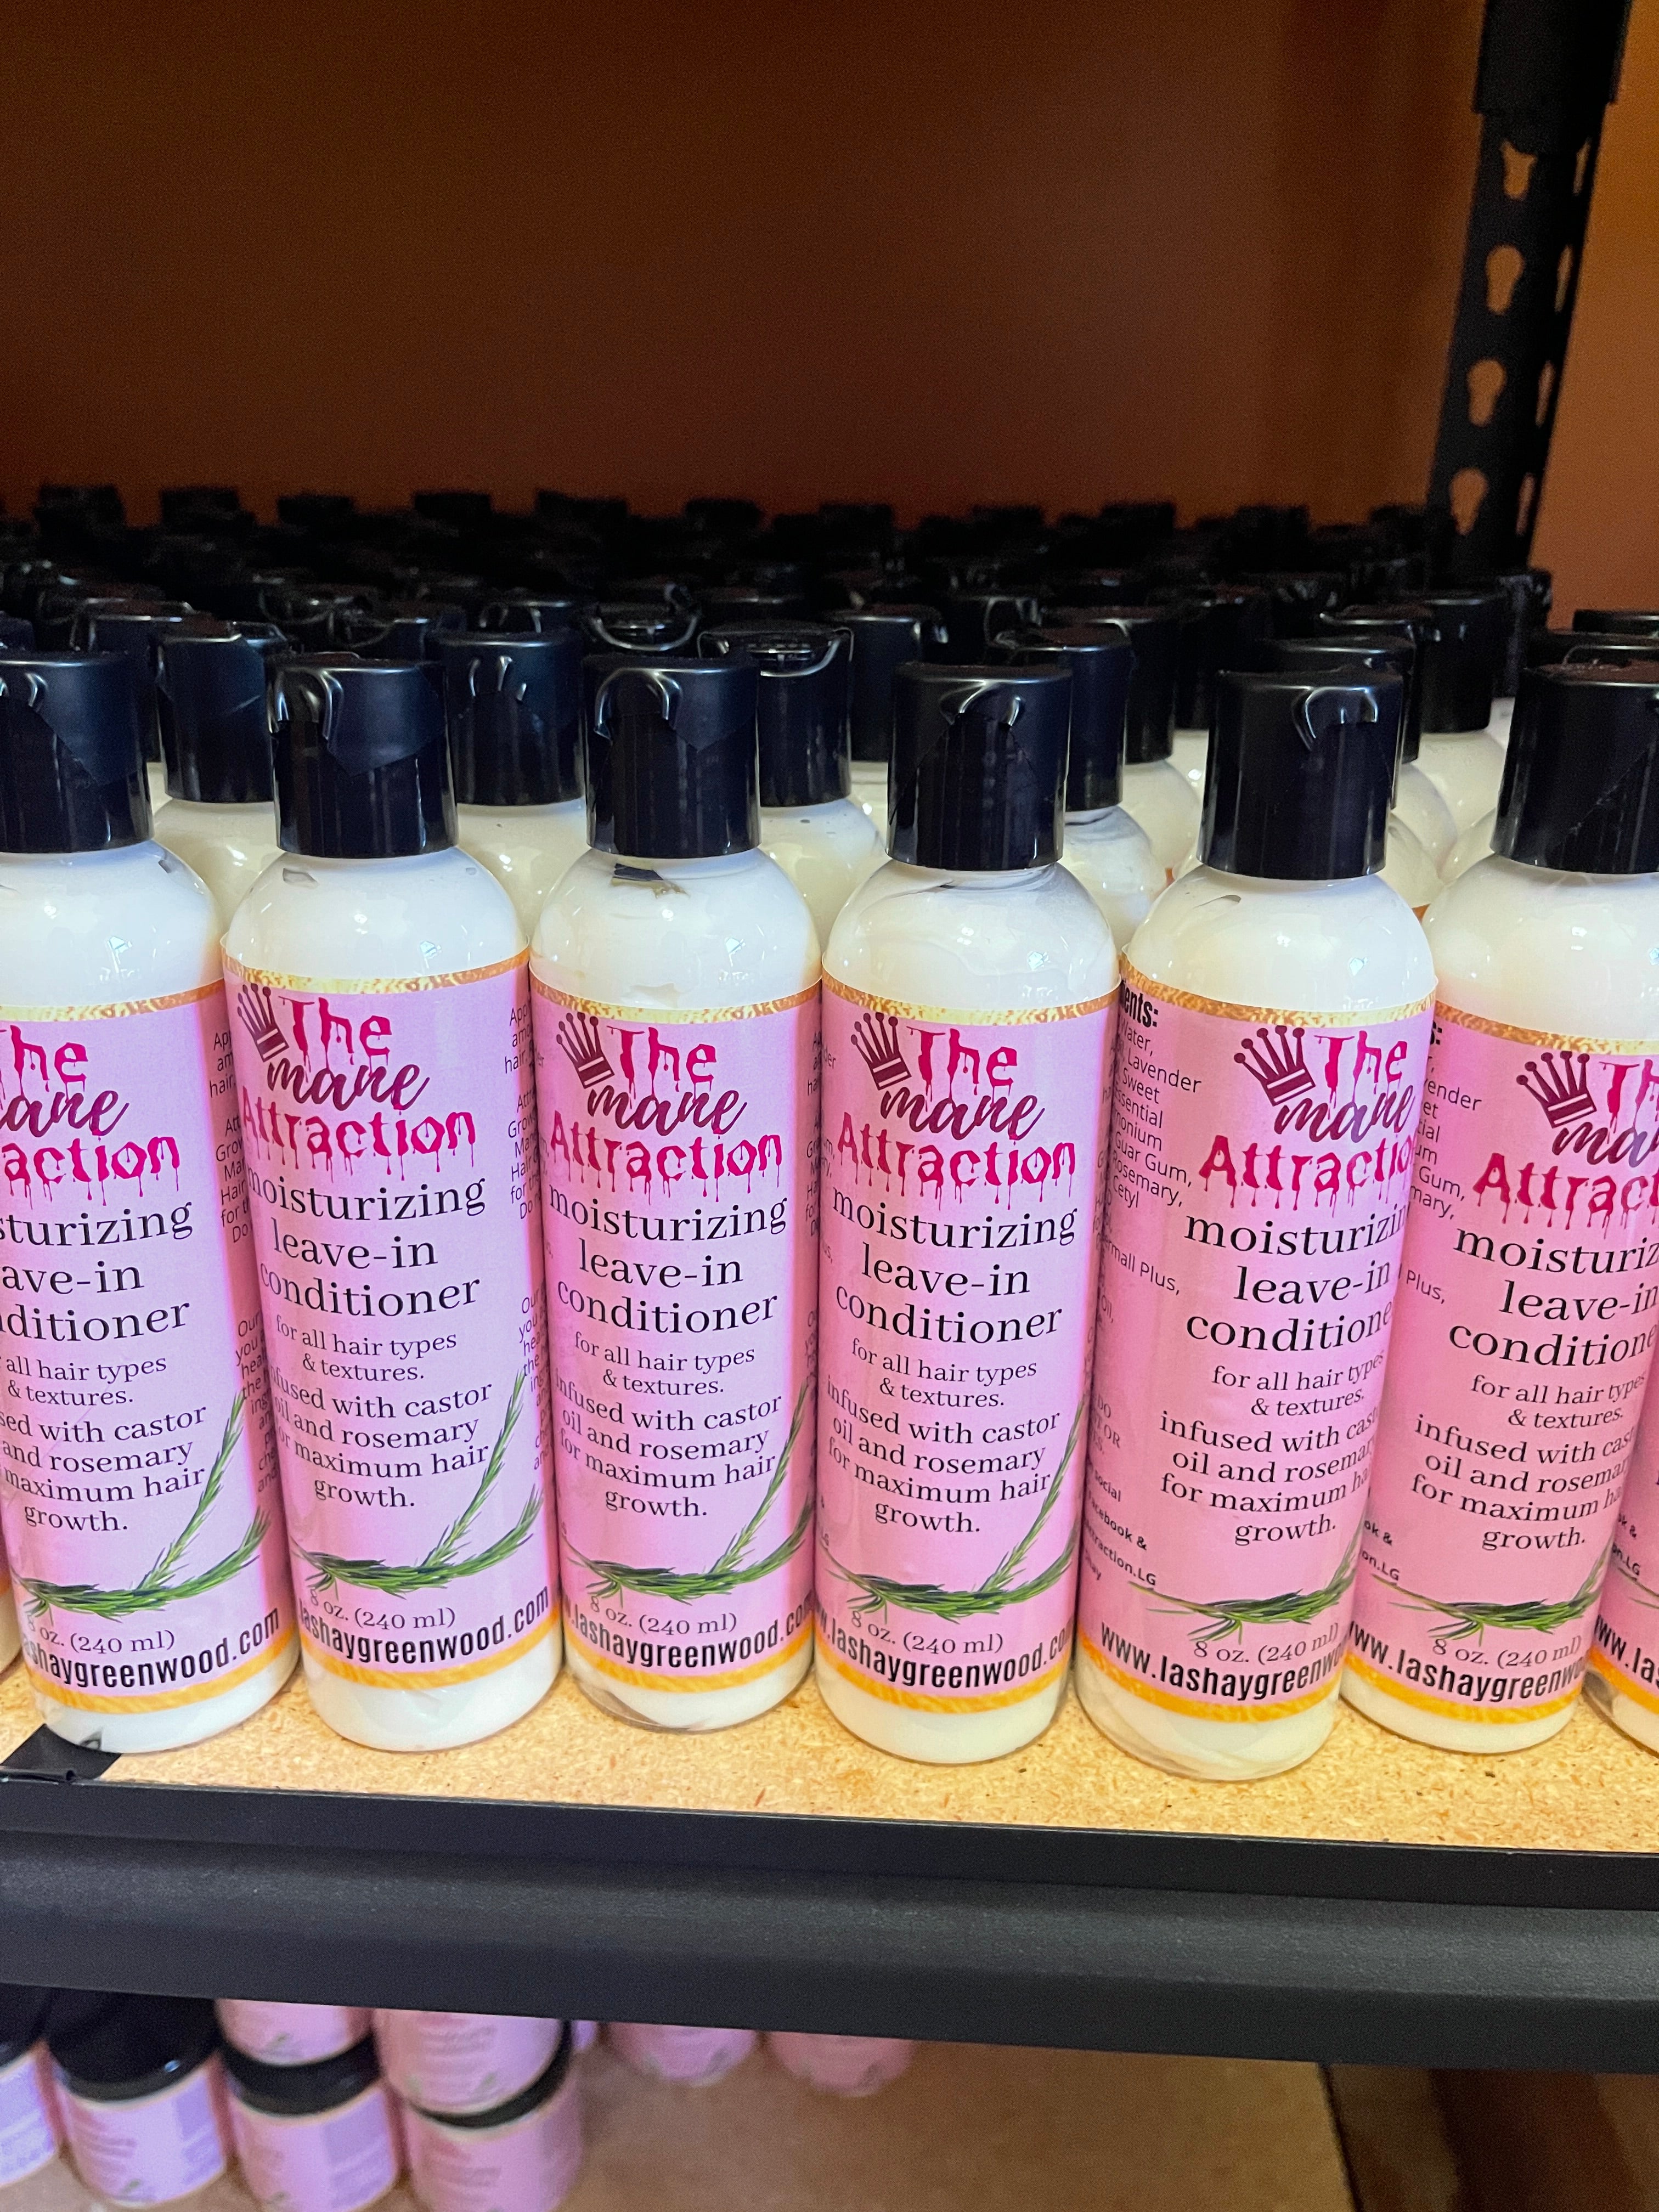 Wholesale Leave-In Conditioner - The Mane Attraction